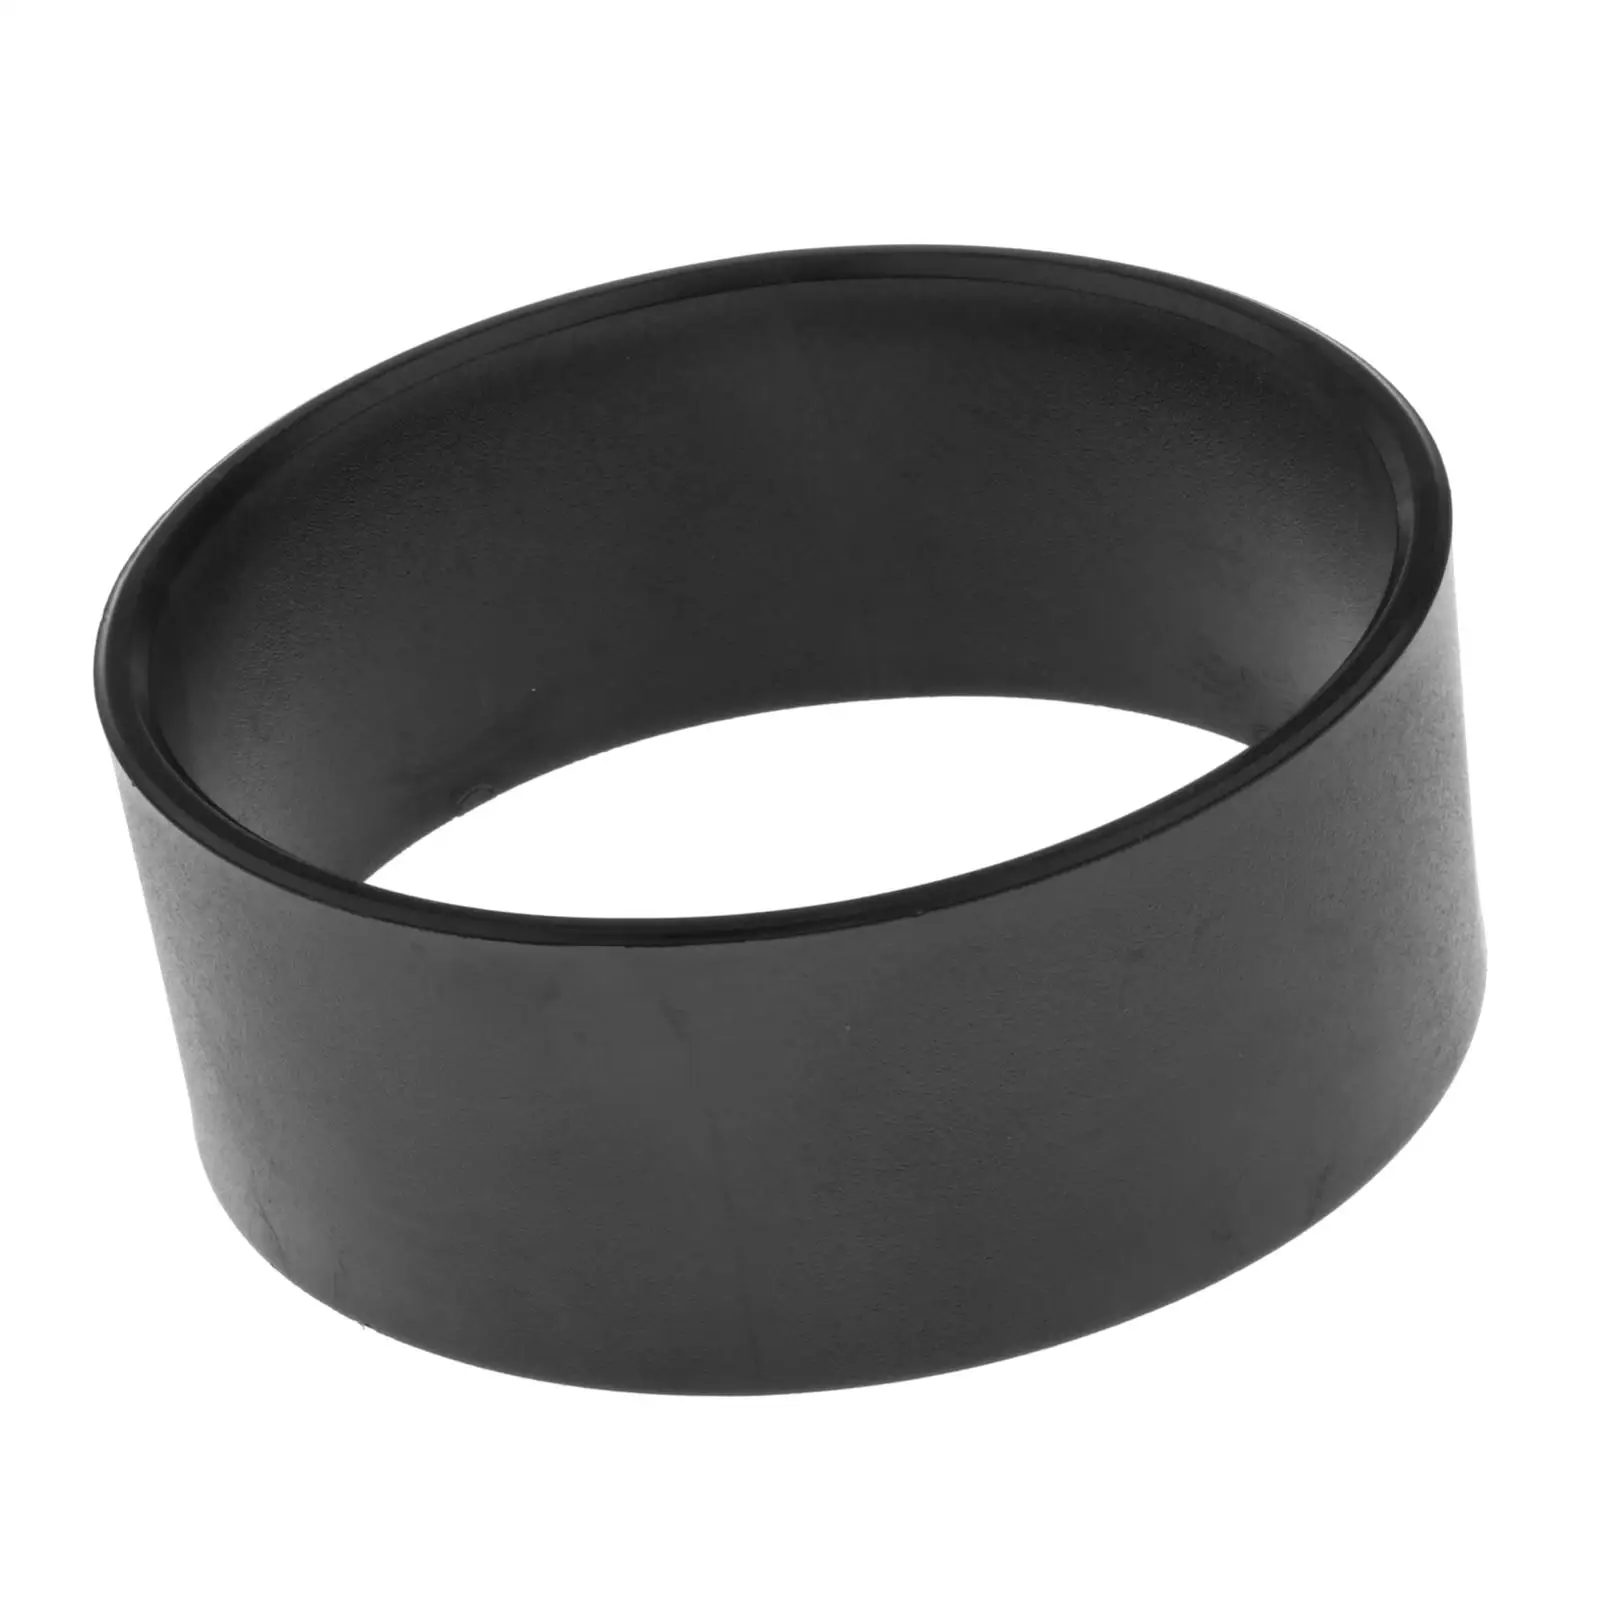 Black Wear Ring 155mm 271000653 Replaces for Sea Doo 947 951 XP Accessories